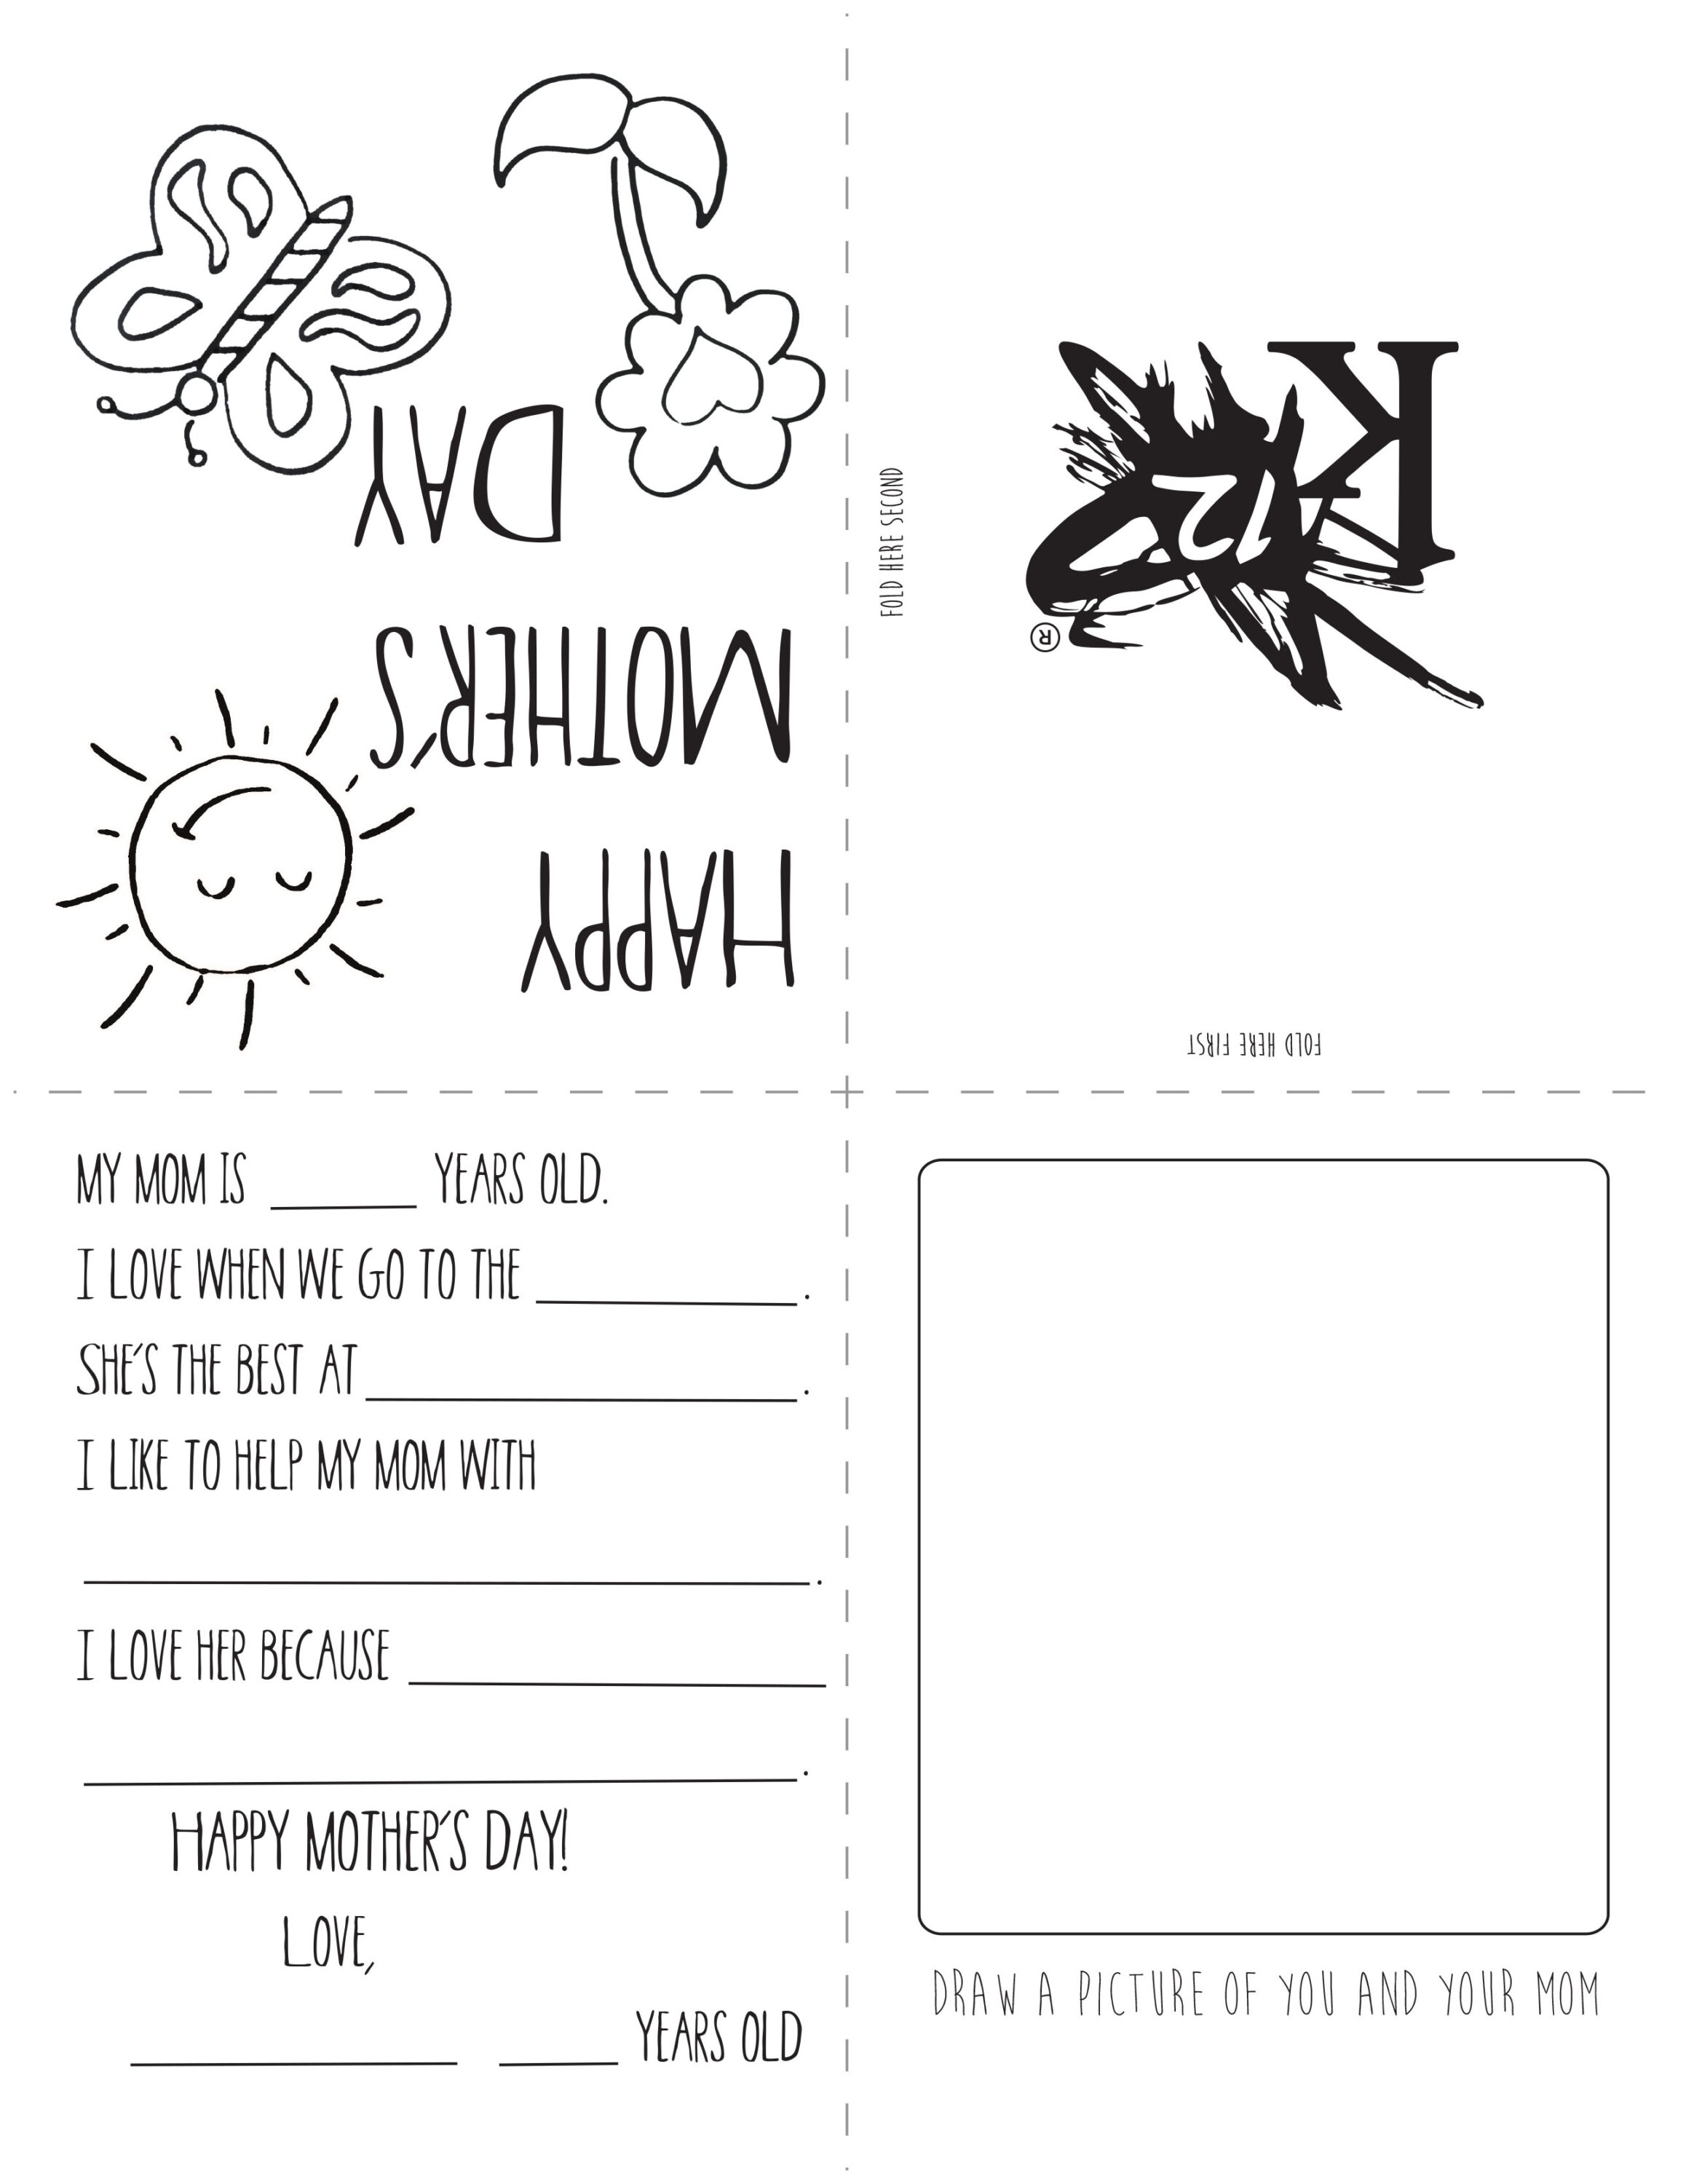 free-printable-mother-s-day-card-to-colour-the-craft-at-home-family